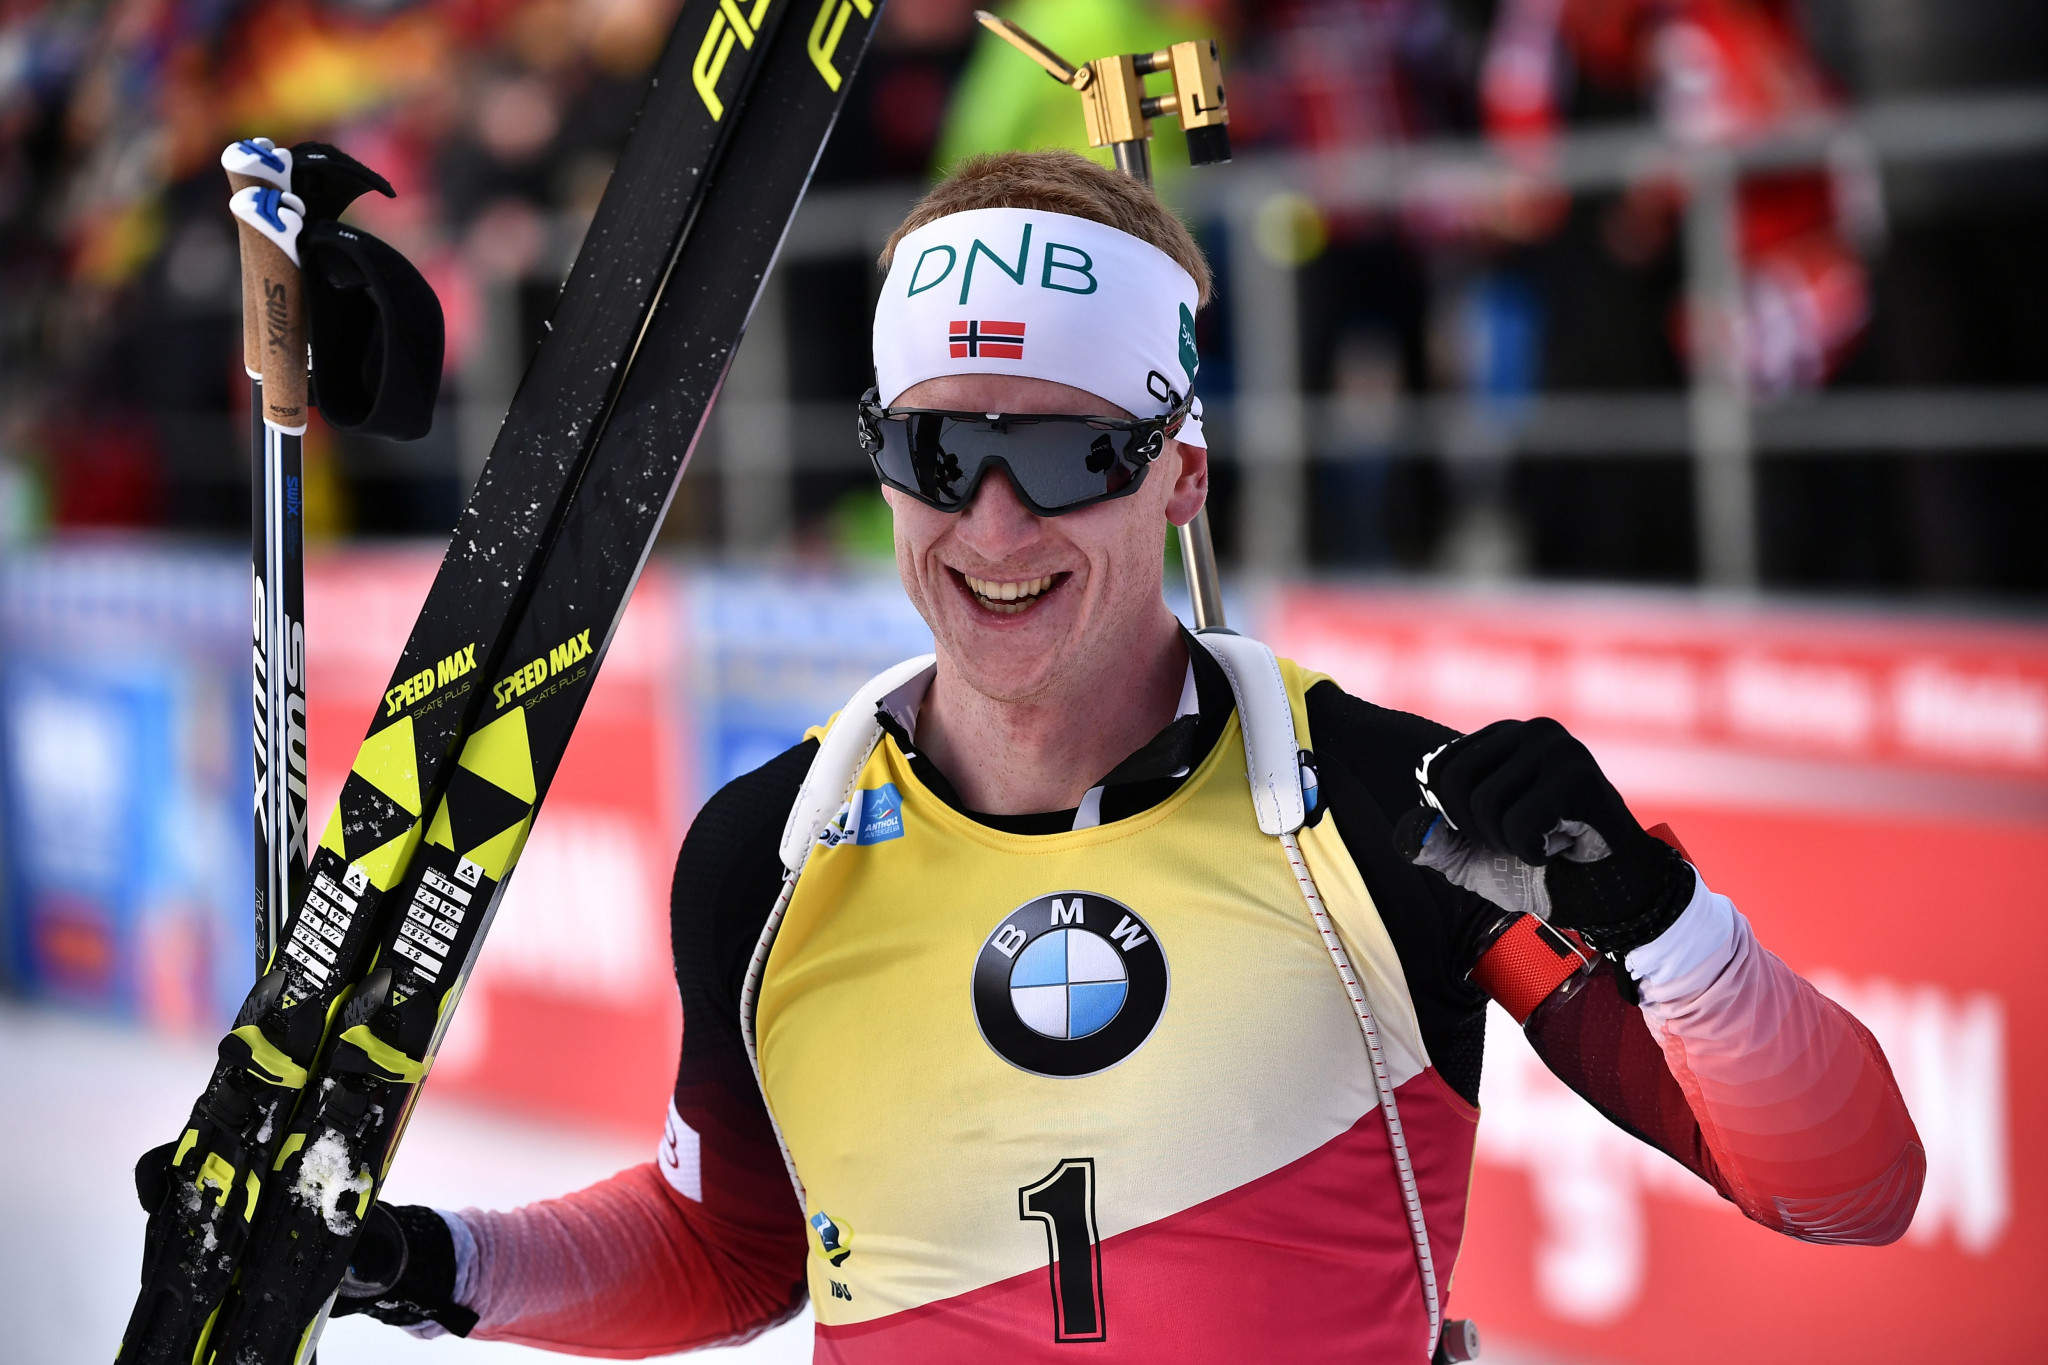 Bø collects 11th victory of season with another win at IBU World Cup in Antholz